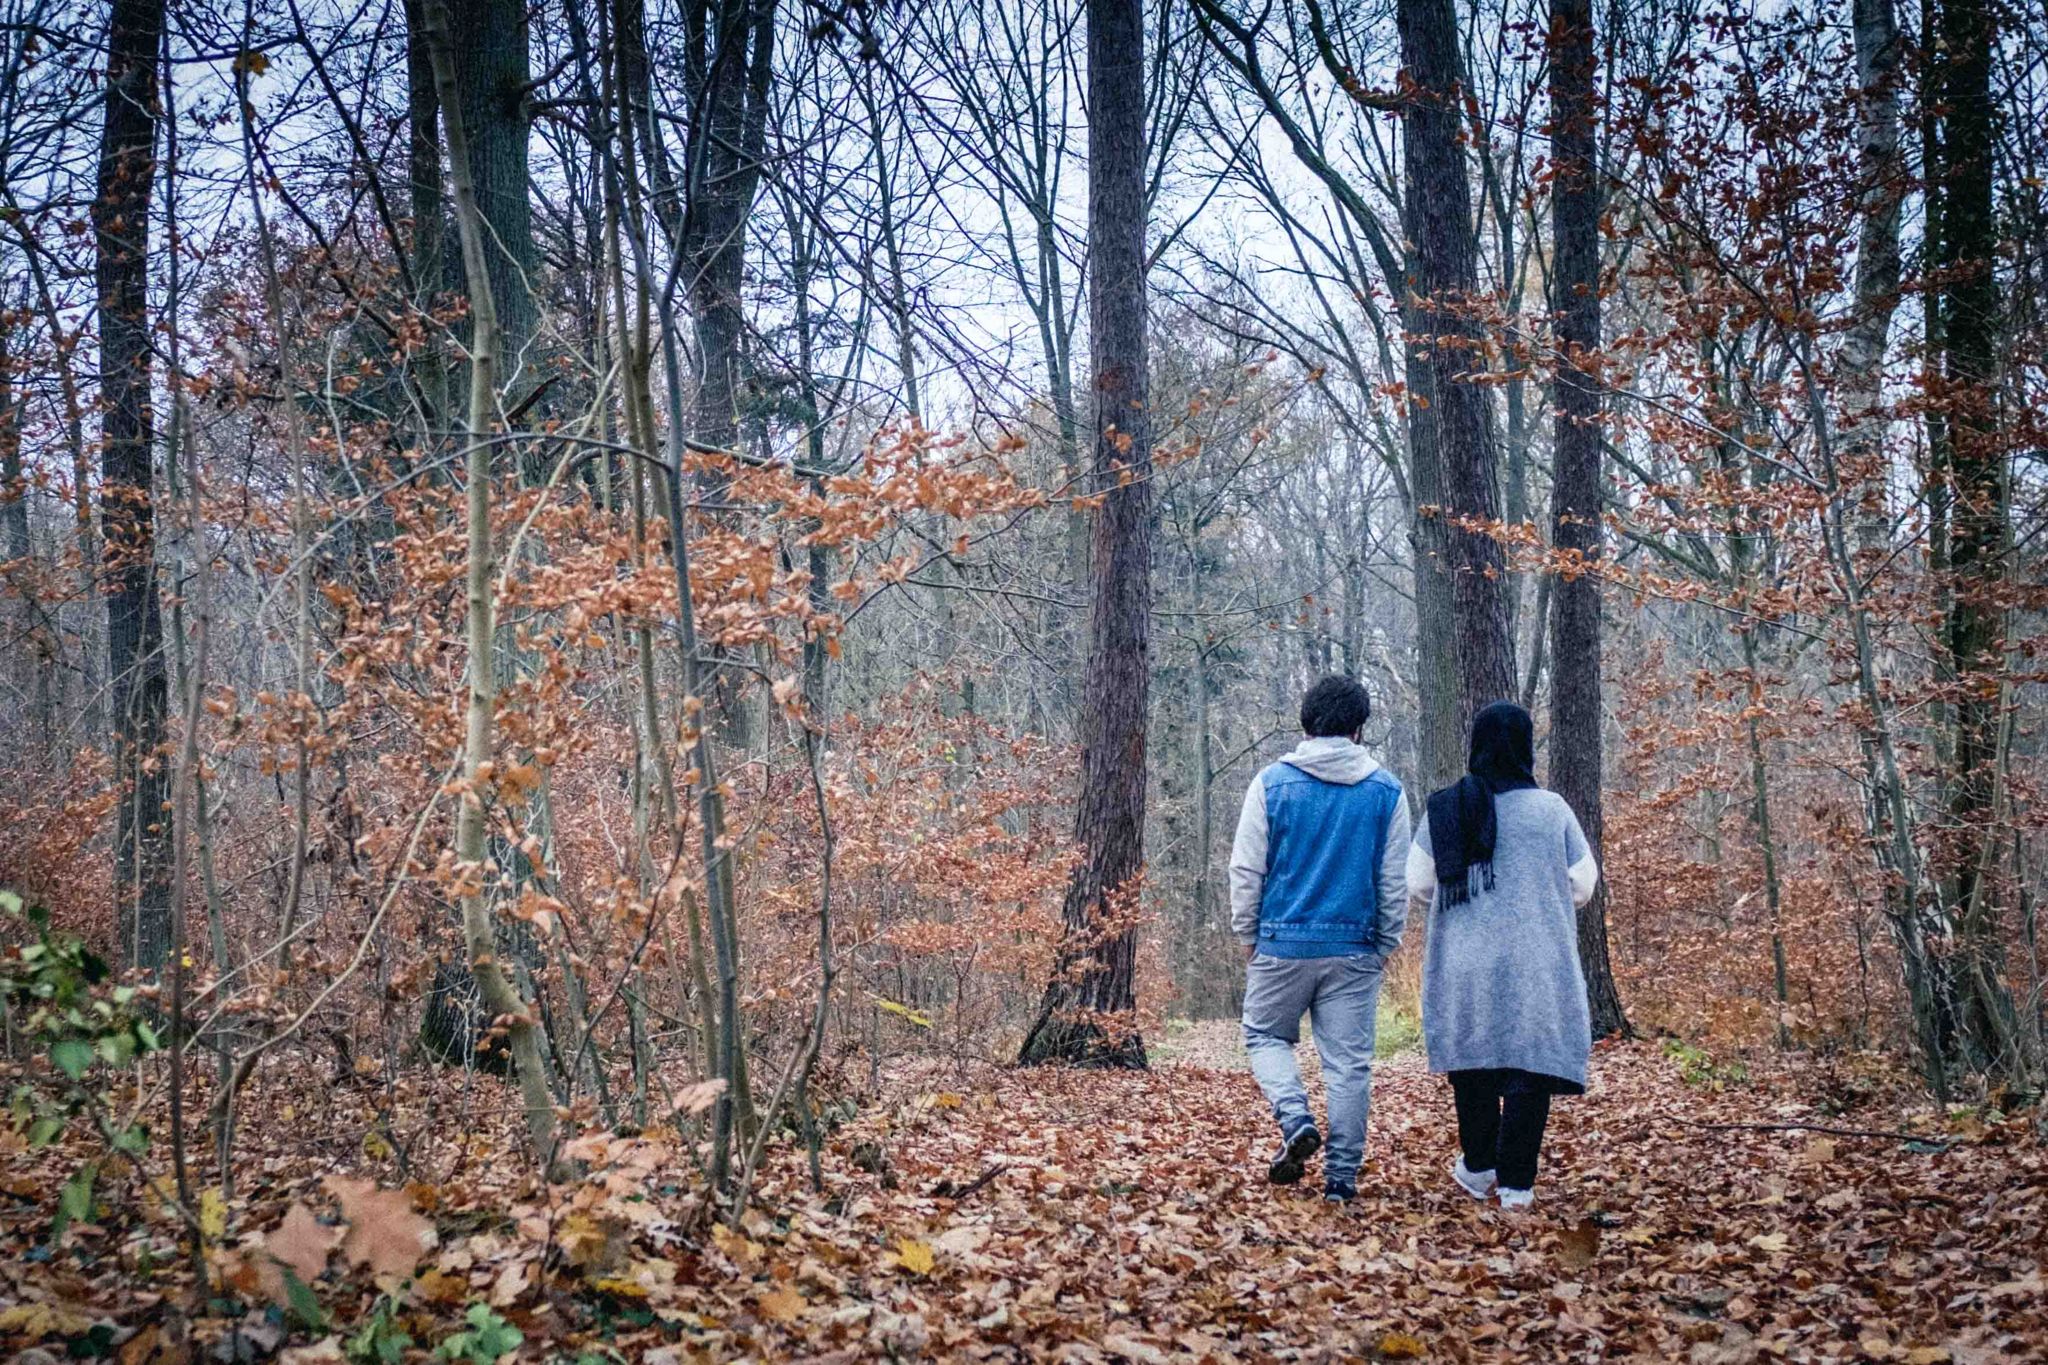 Serina and her husband walking in the woods outside the camp